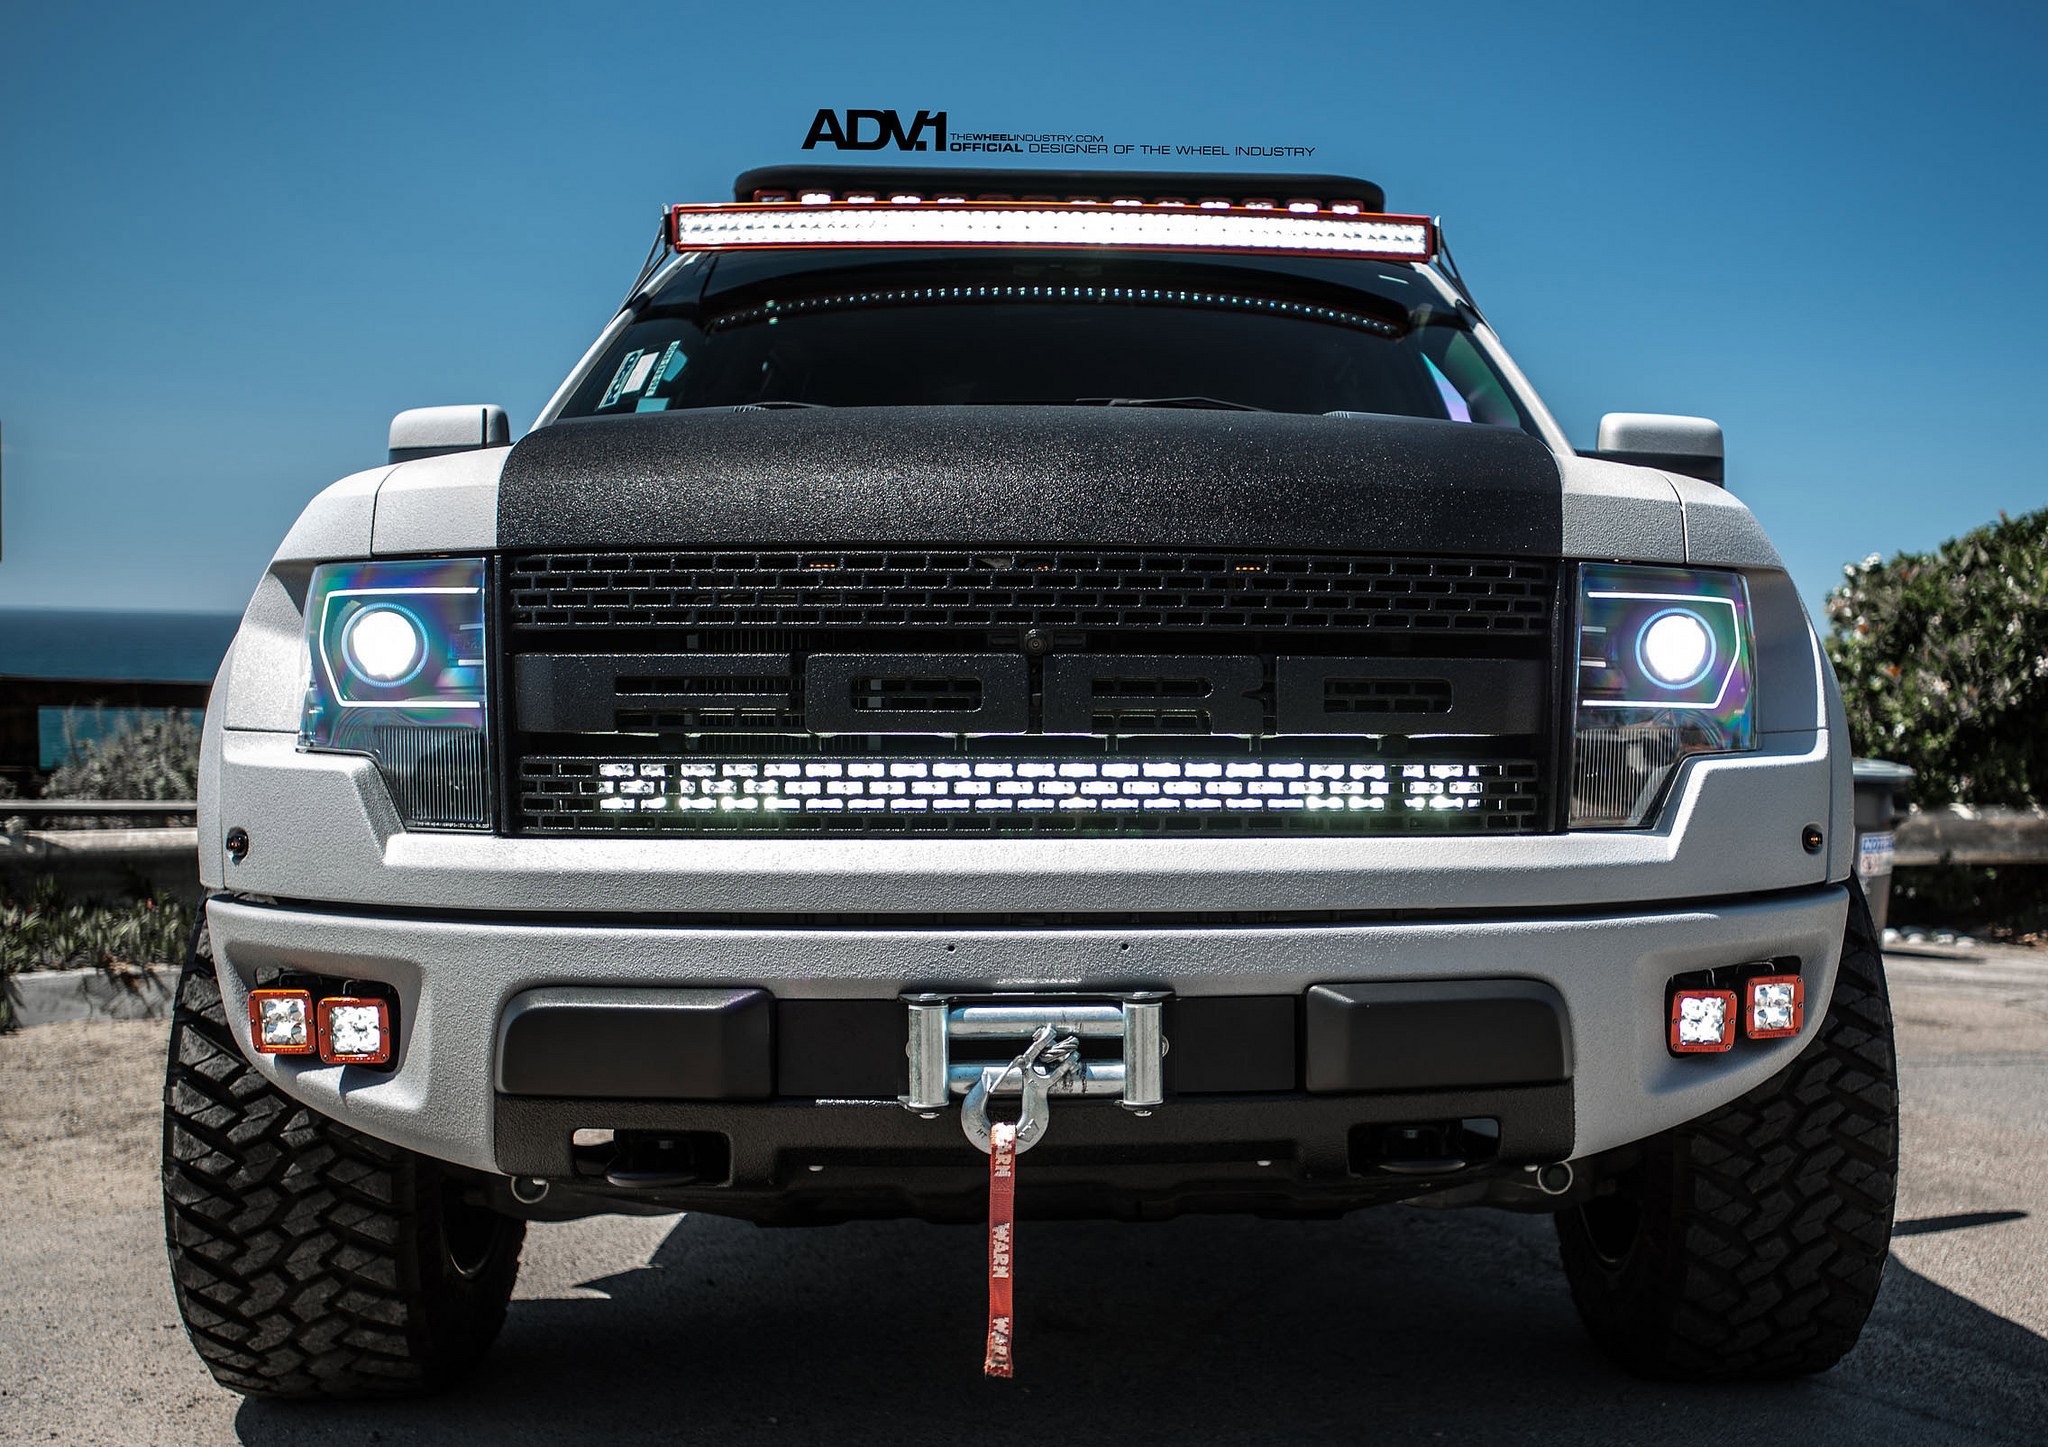 Raptor Grille With LED Lightbar - Photo by ADV.1